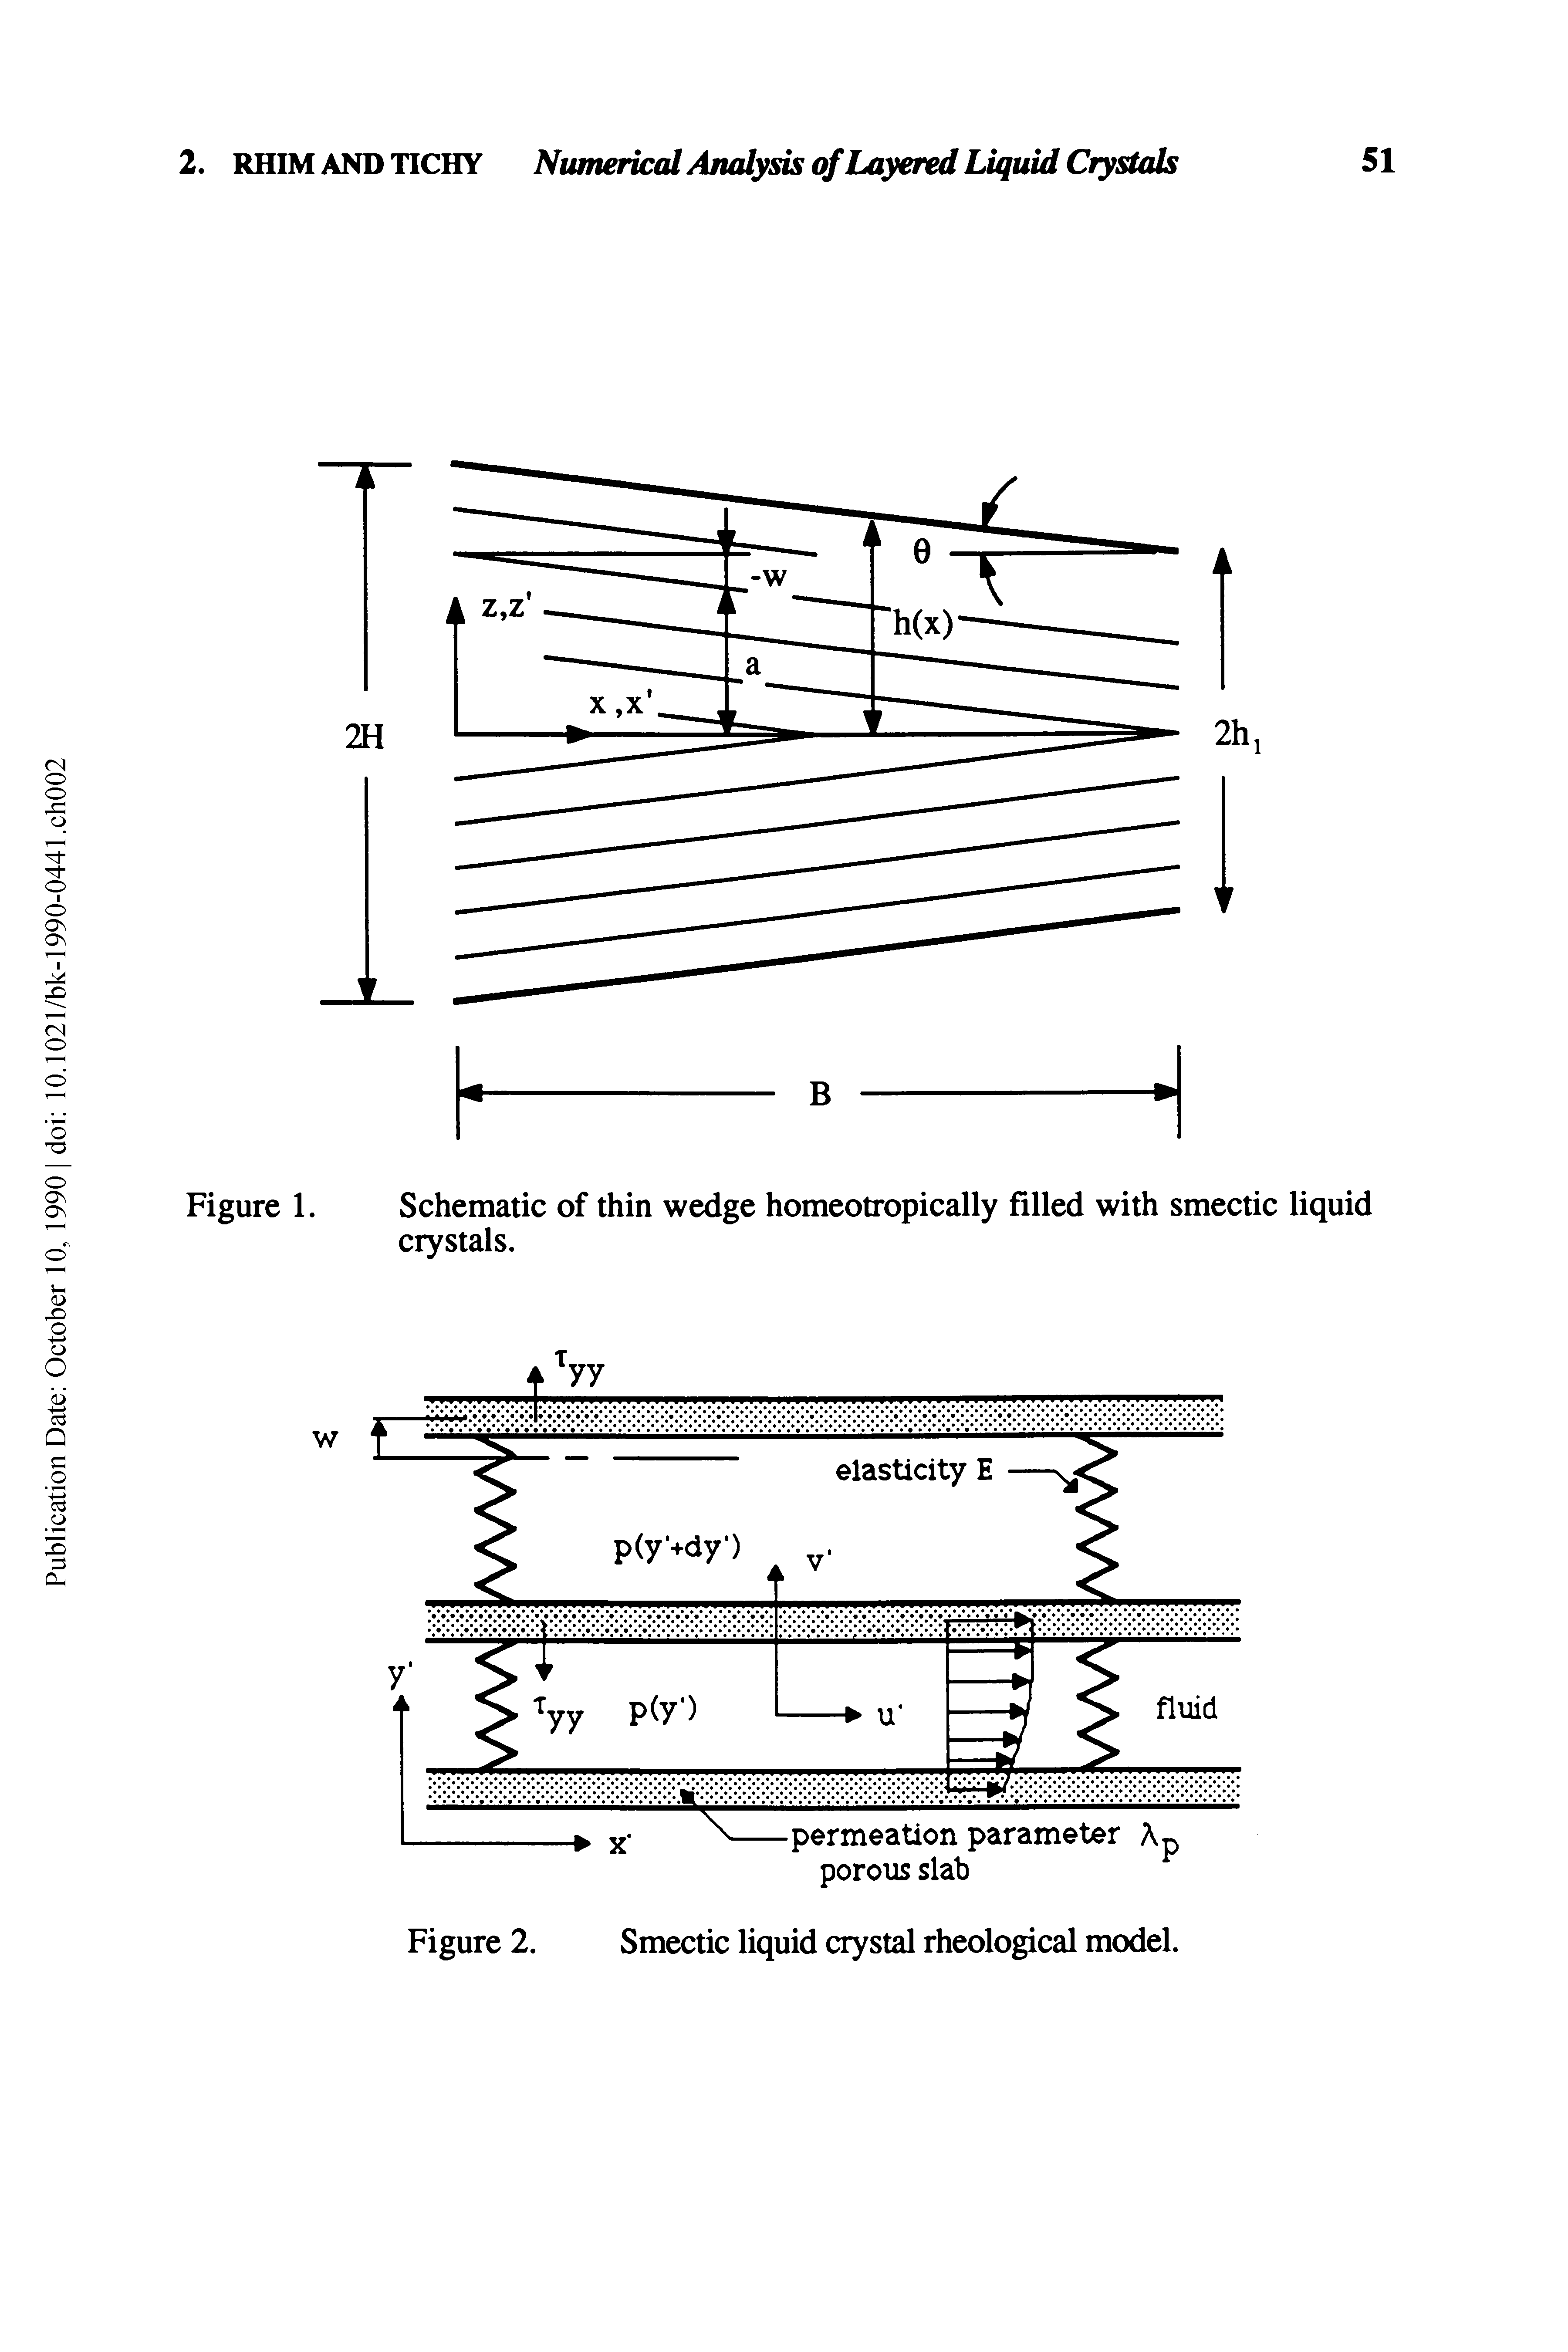 Figure 1. Schematic of thin wedge homeotropically filled with smectic liquid crystals.